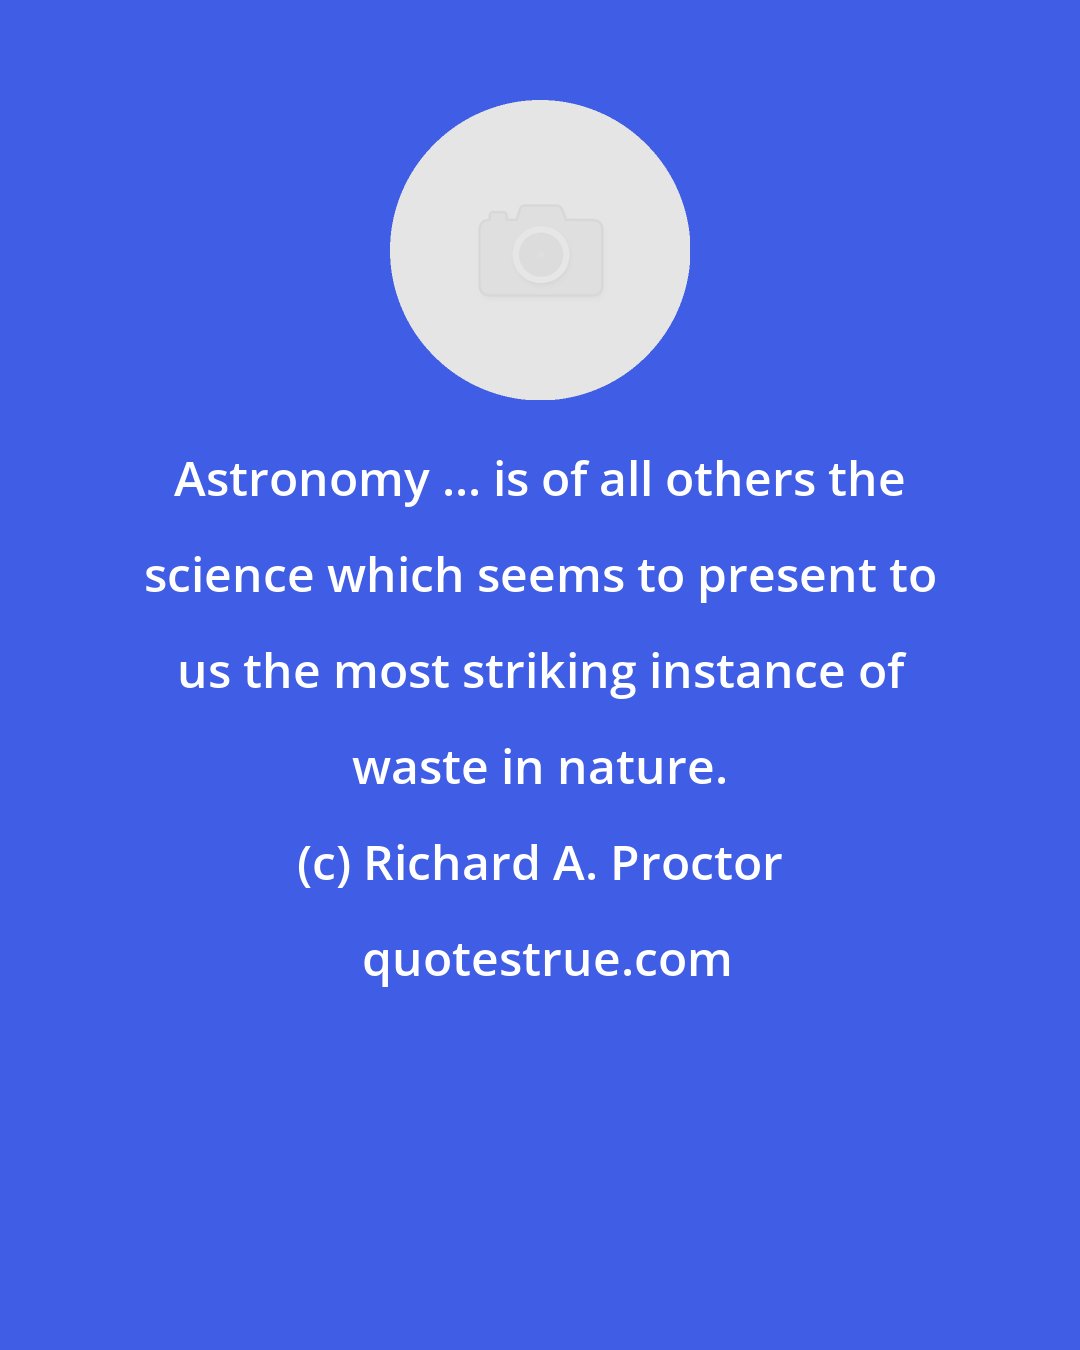 Richard A. Proctor: Astronomy ... is of all others the science which seems to present to us the most striking instance of waste in nature.